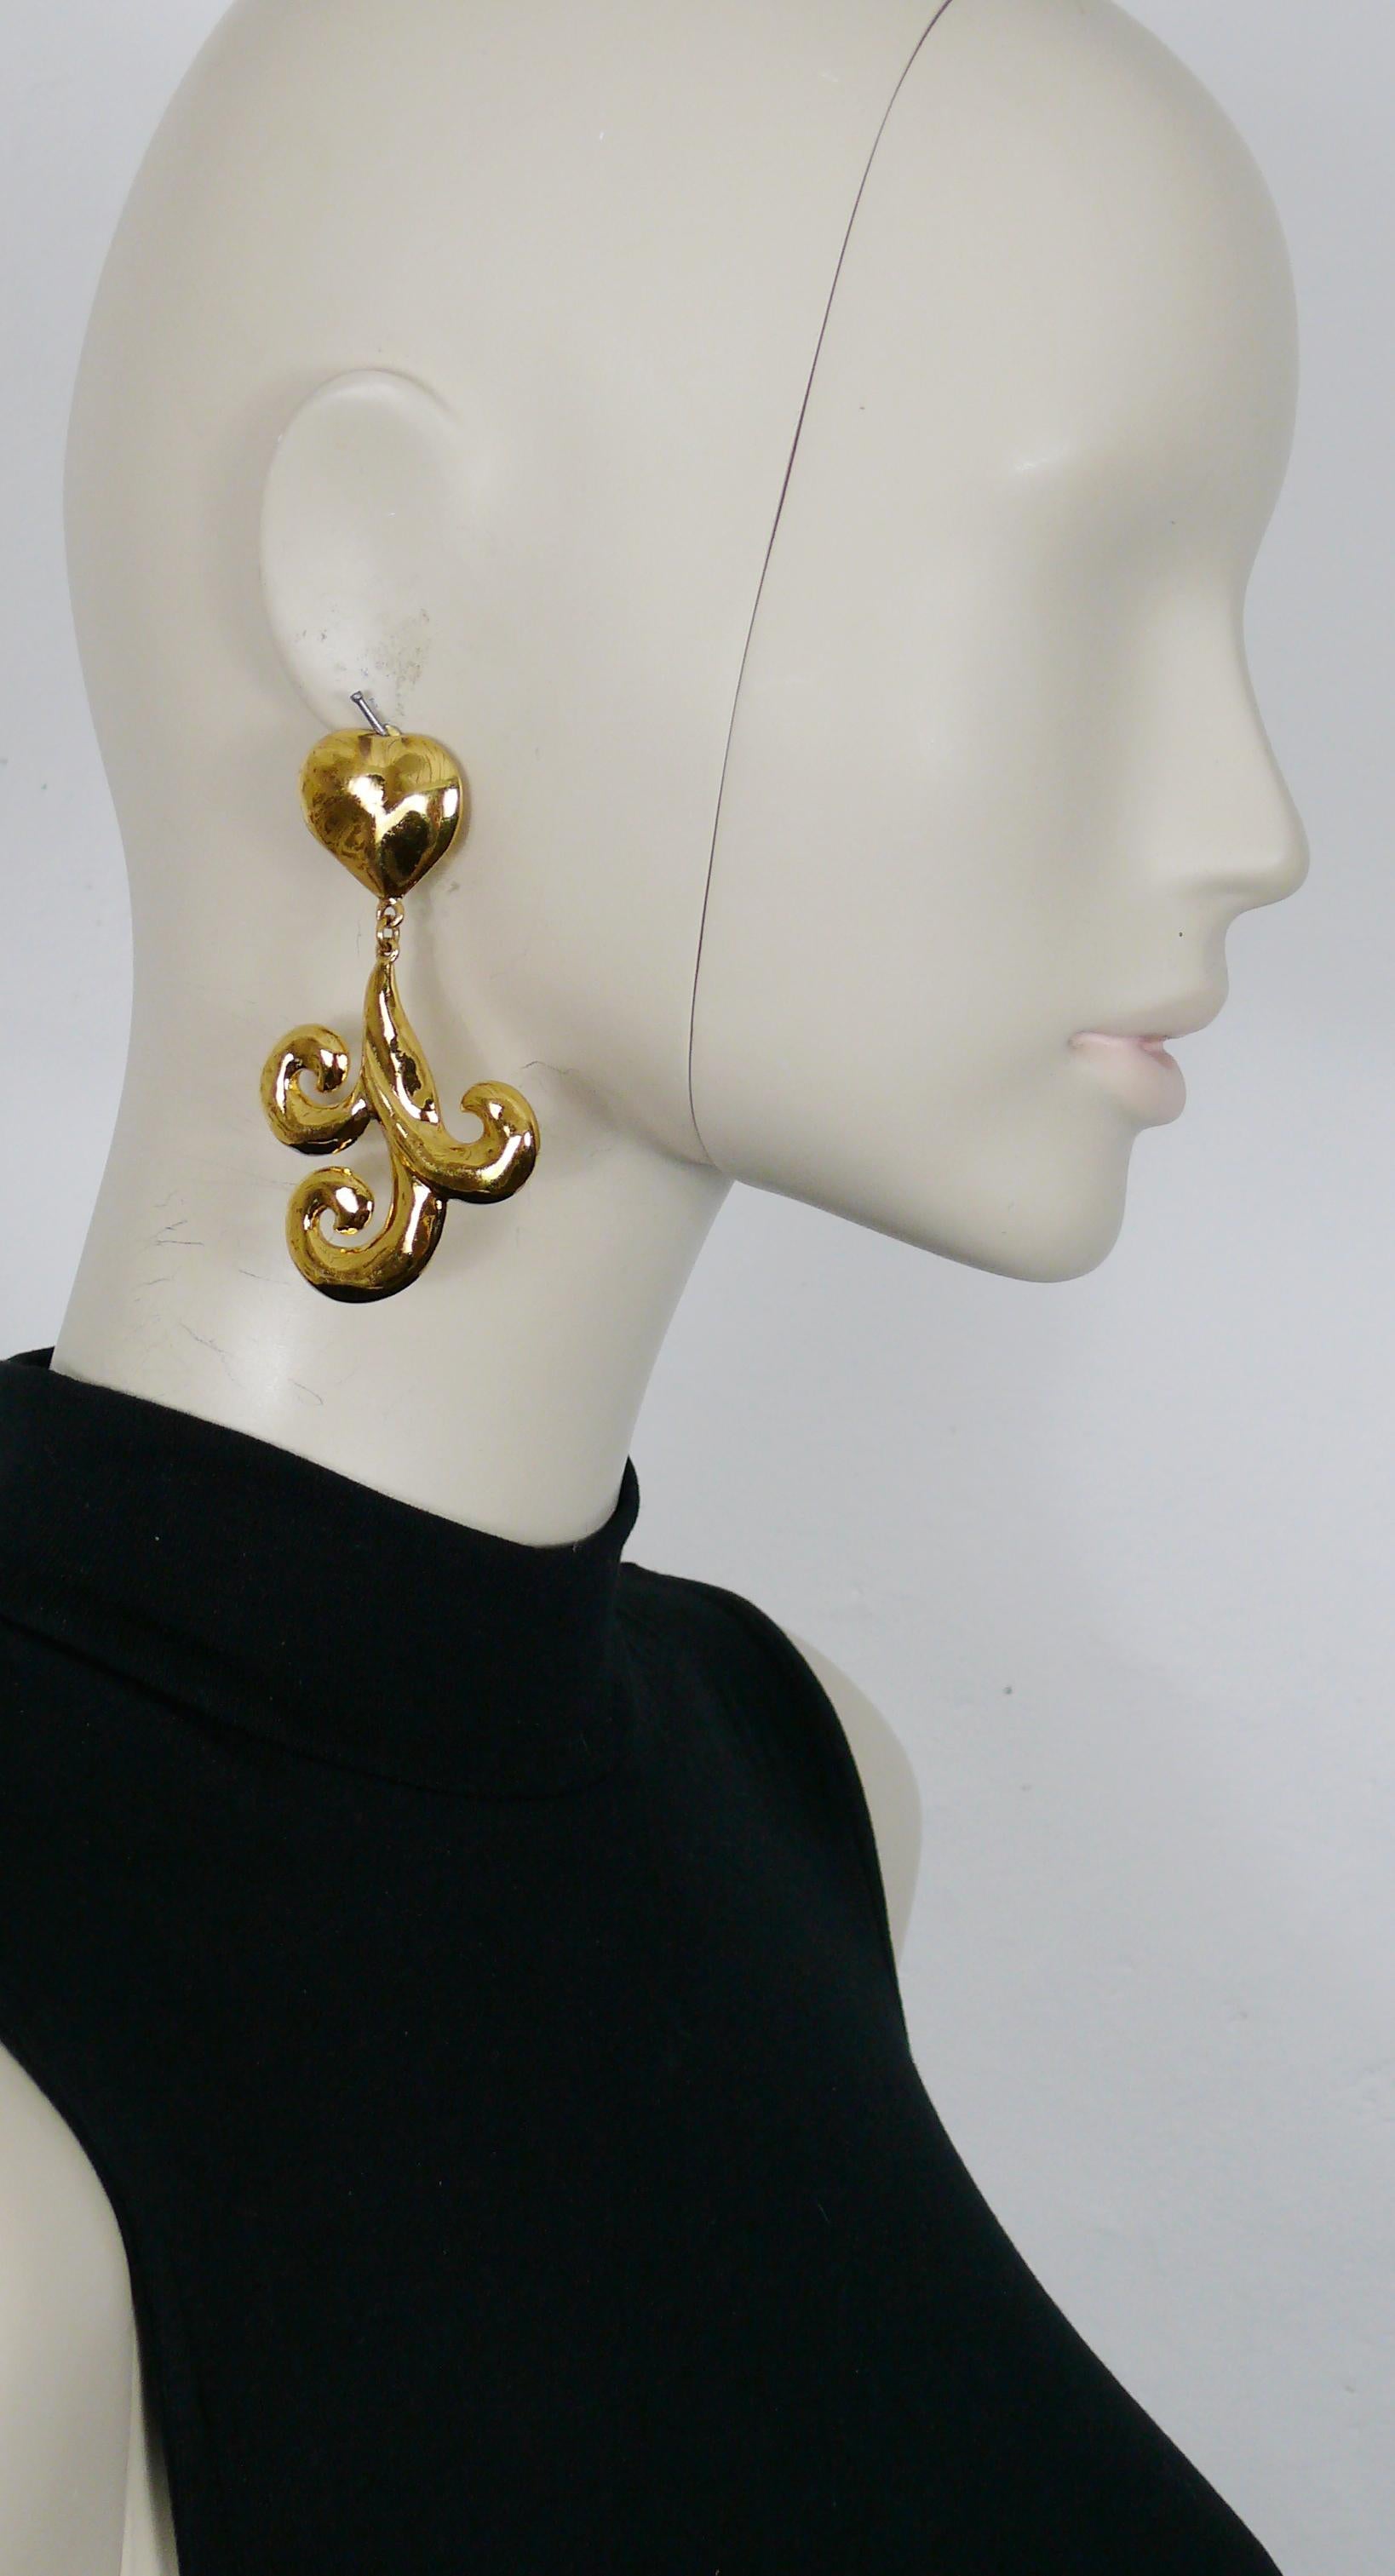 YVES SAINT LAURENT vintage gold toned dangling earrings (clip on) featuring arabesques design topped by a heart.

Embossed YSL Made in France.

Indicative measurements : max. height 8 cm (3.15 inches) / max. width approx. 4.3 cm (1.69